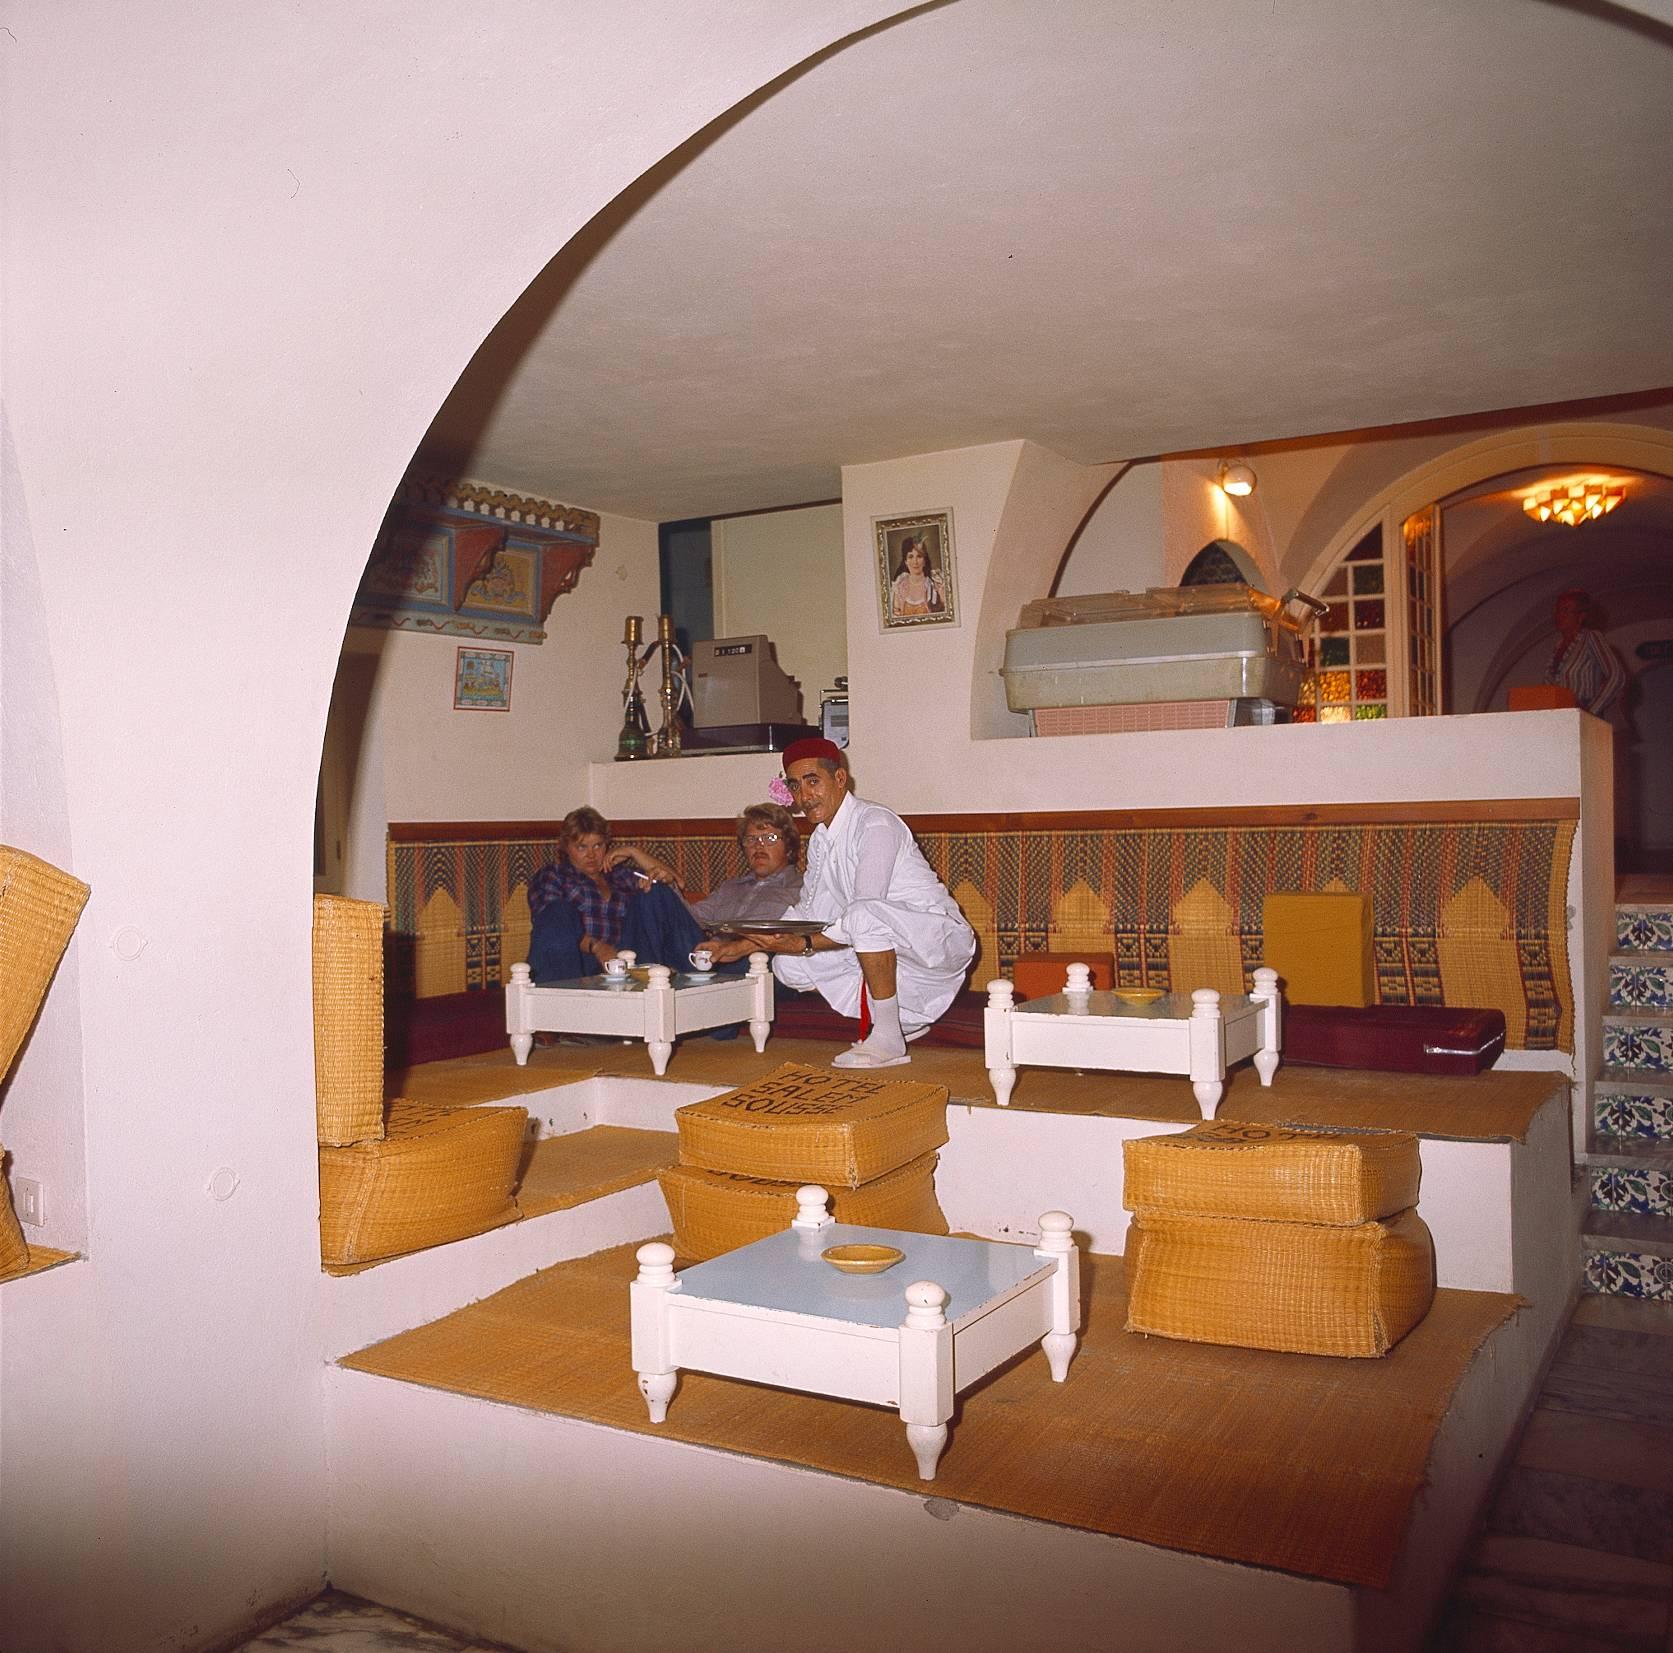 Walter Rudolph Color Photograph - Hotel Lobbies, Rooms and Bars - Hotel Salem Tunesien, Sousse, 1980ties